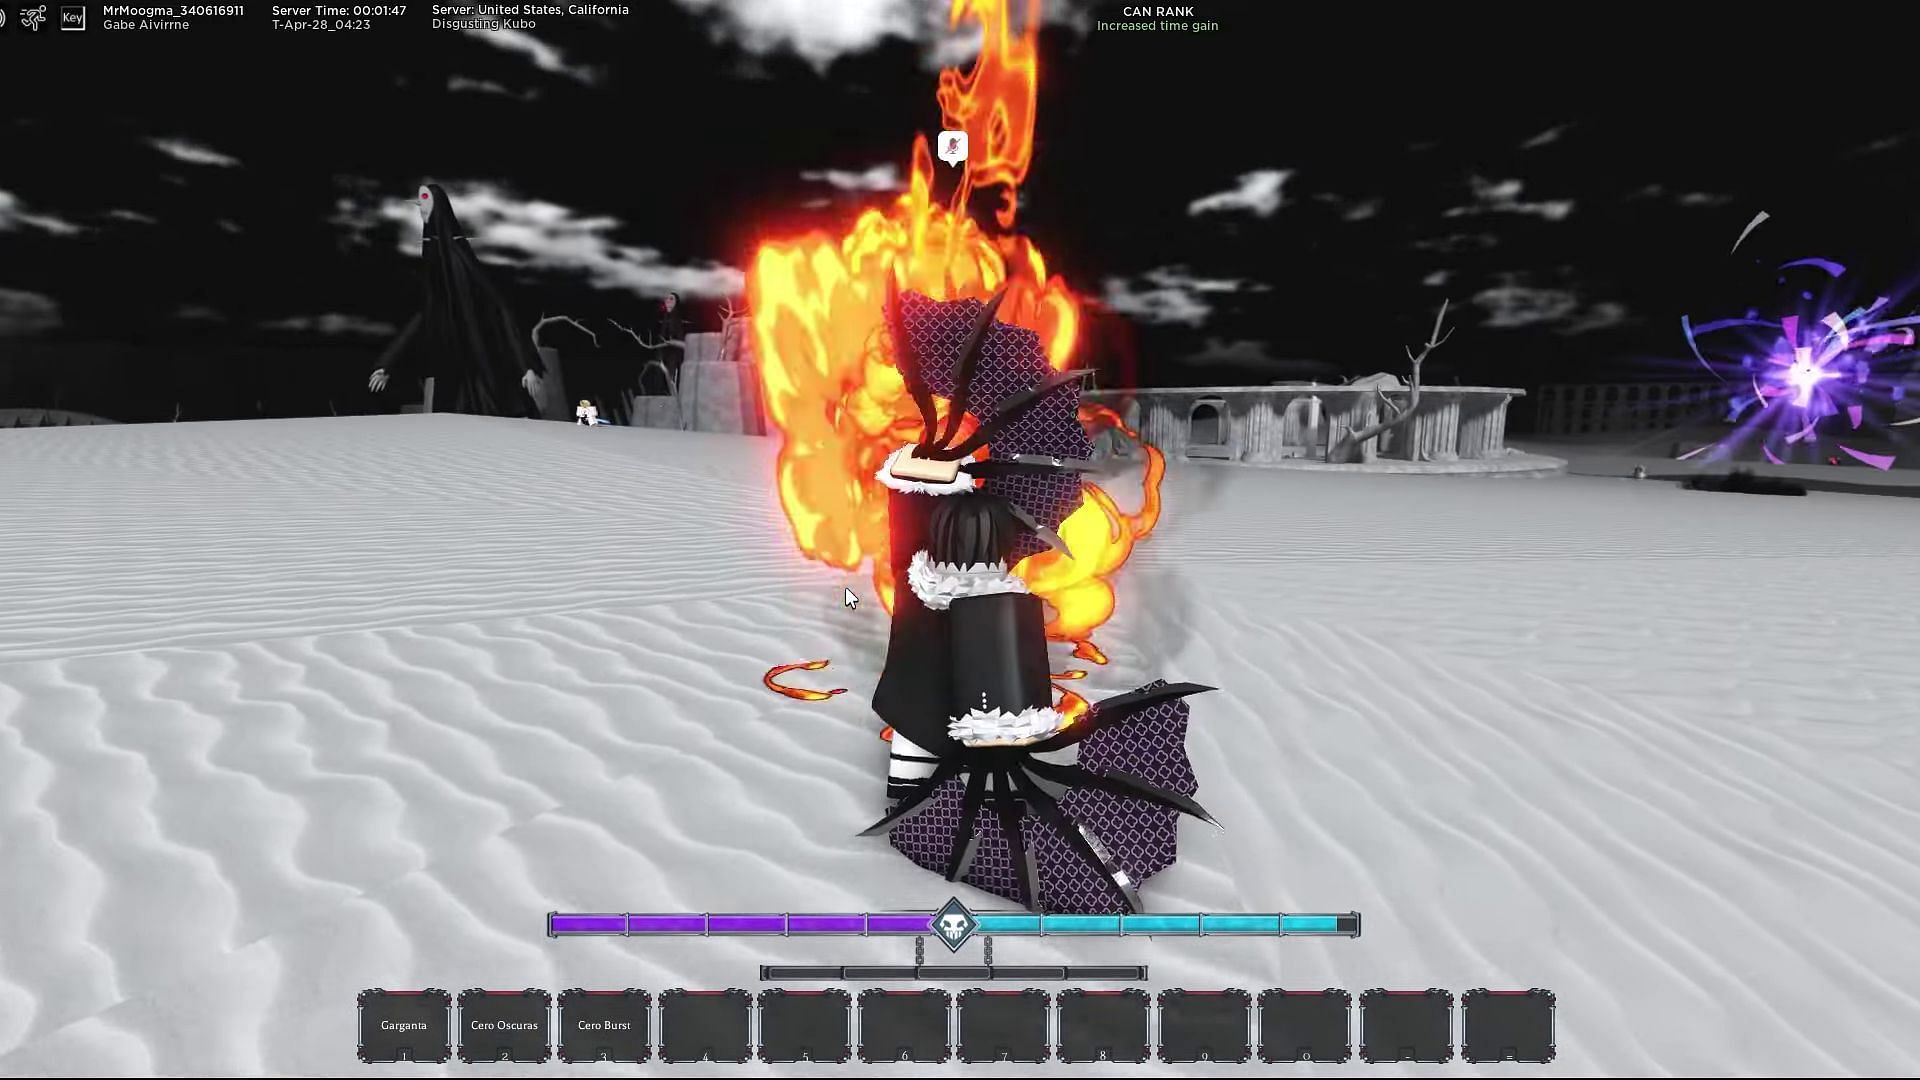 A skill unlocked by obtaining Partial Res (Image via Roblox || MrMoogma on YouTube)